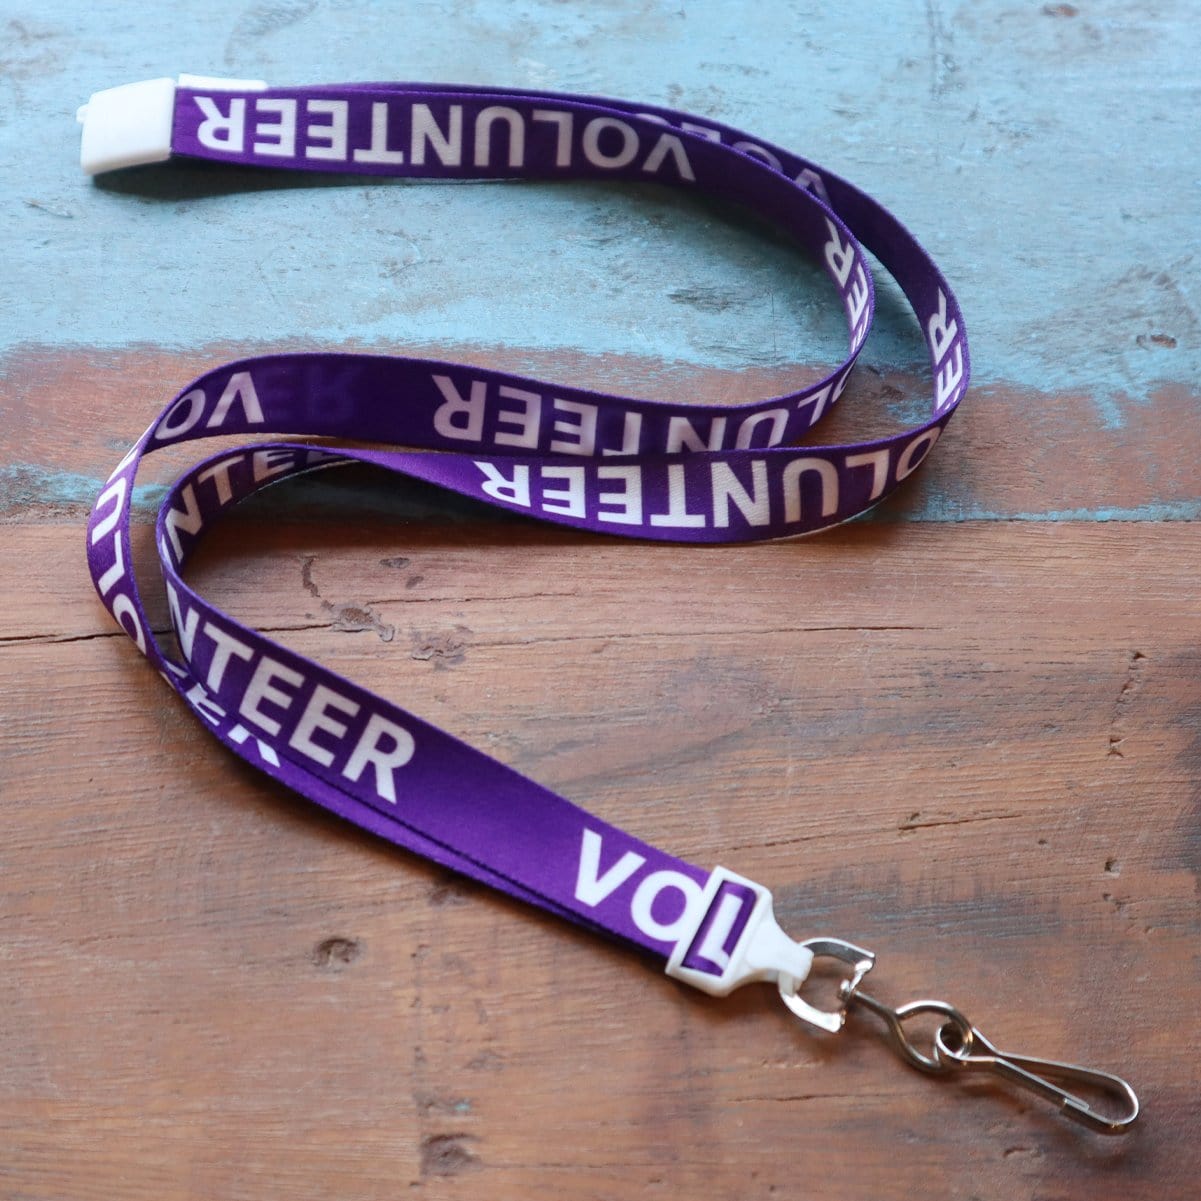 A purple "Volunteer" Breakaway Lanyard W/ Swivel Hook 2138-5230 with white text reading "VOLUNTEER" repeatedly, featuring a swivel hook at the bottom. The lanyard is laid out on a worn wooden surface.